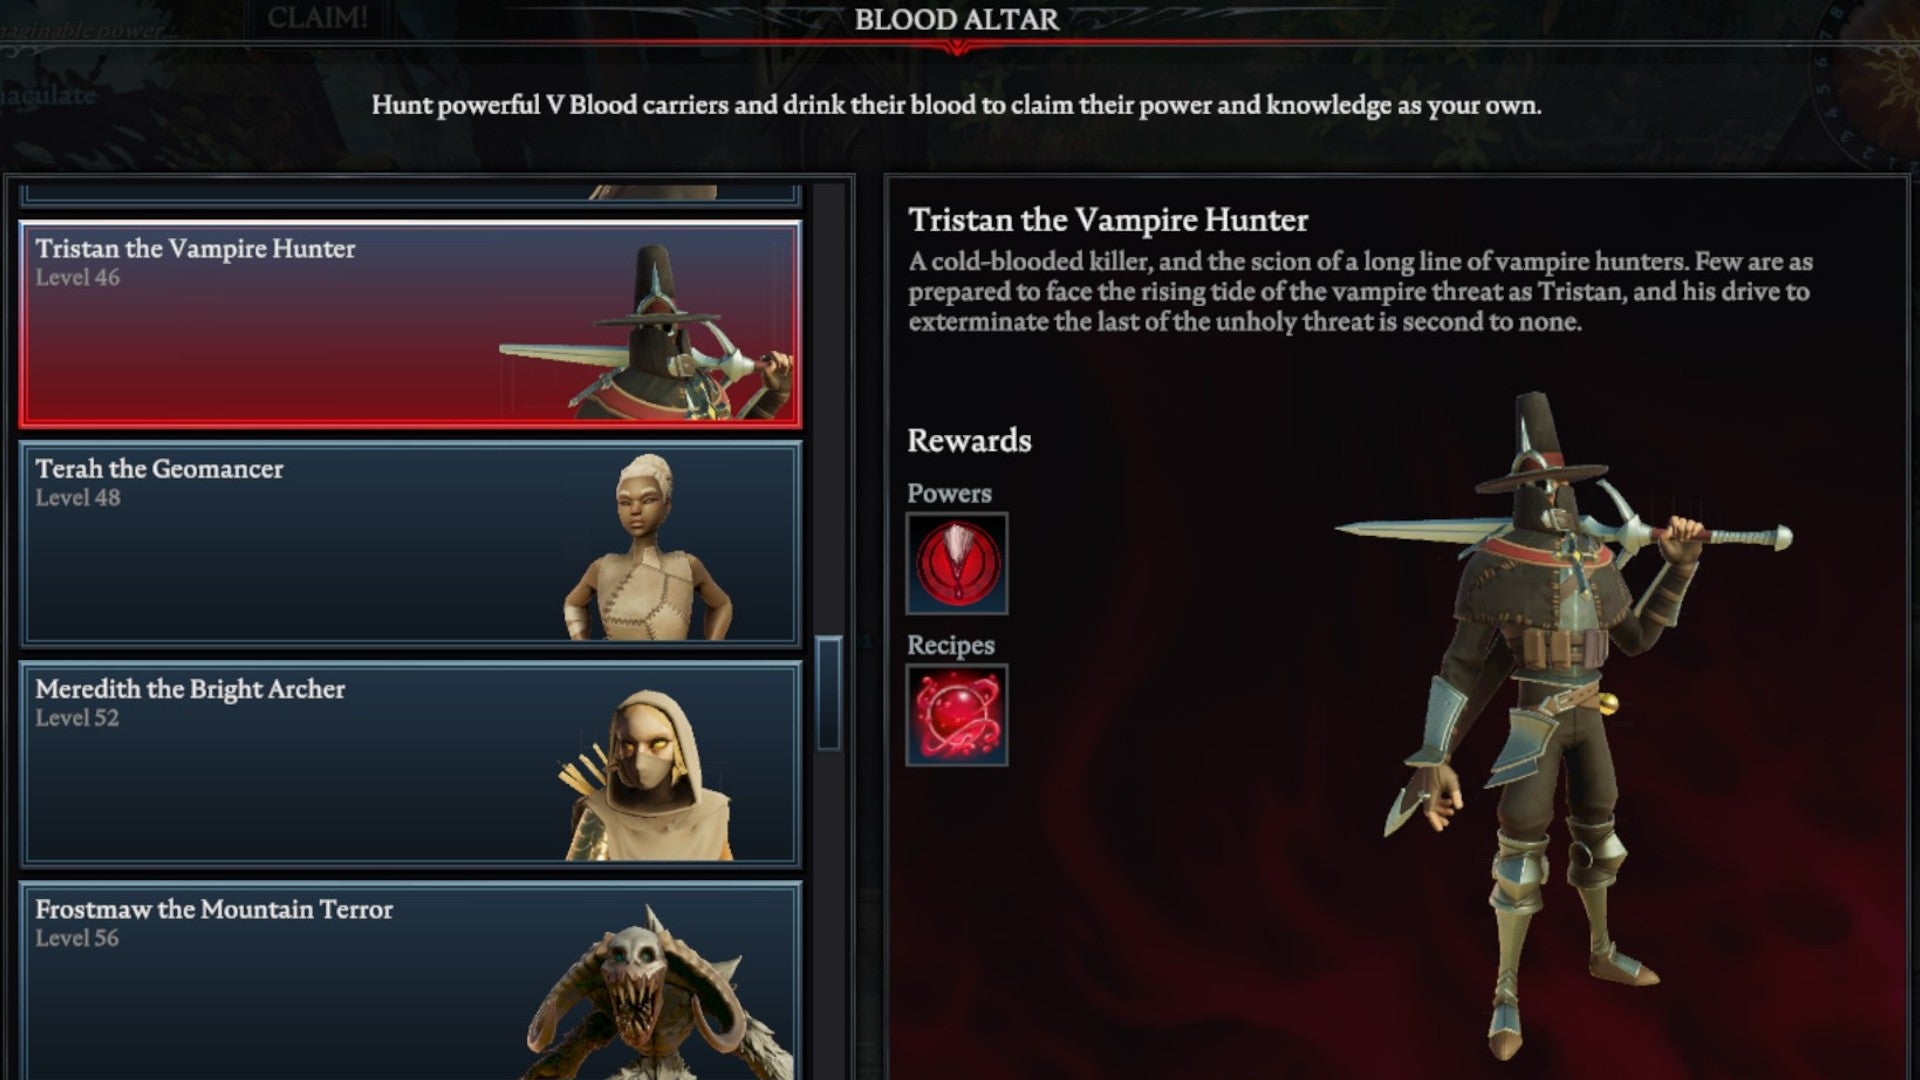 V Rising Tristan the Vampire Hunter Blood Altar tracking page, showing an image of the hunter on the right and a list of bosses on the left